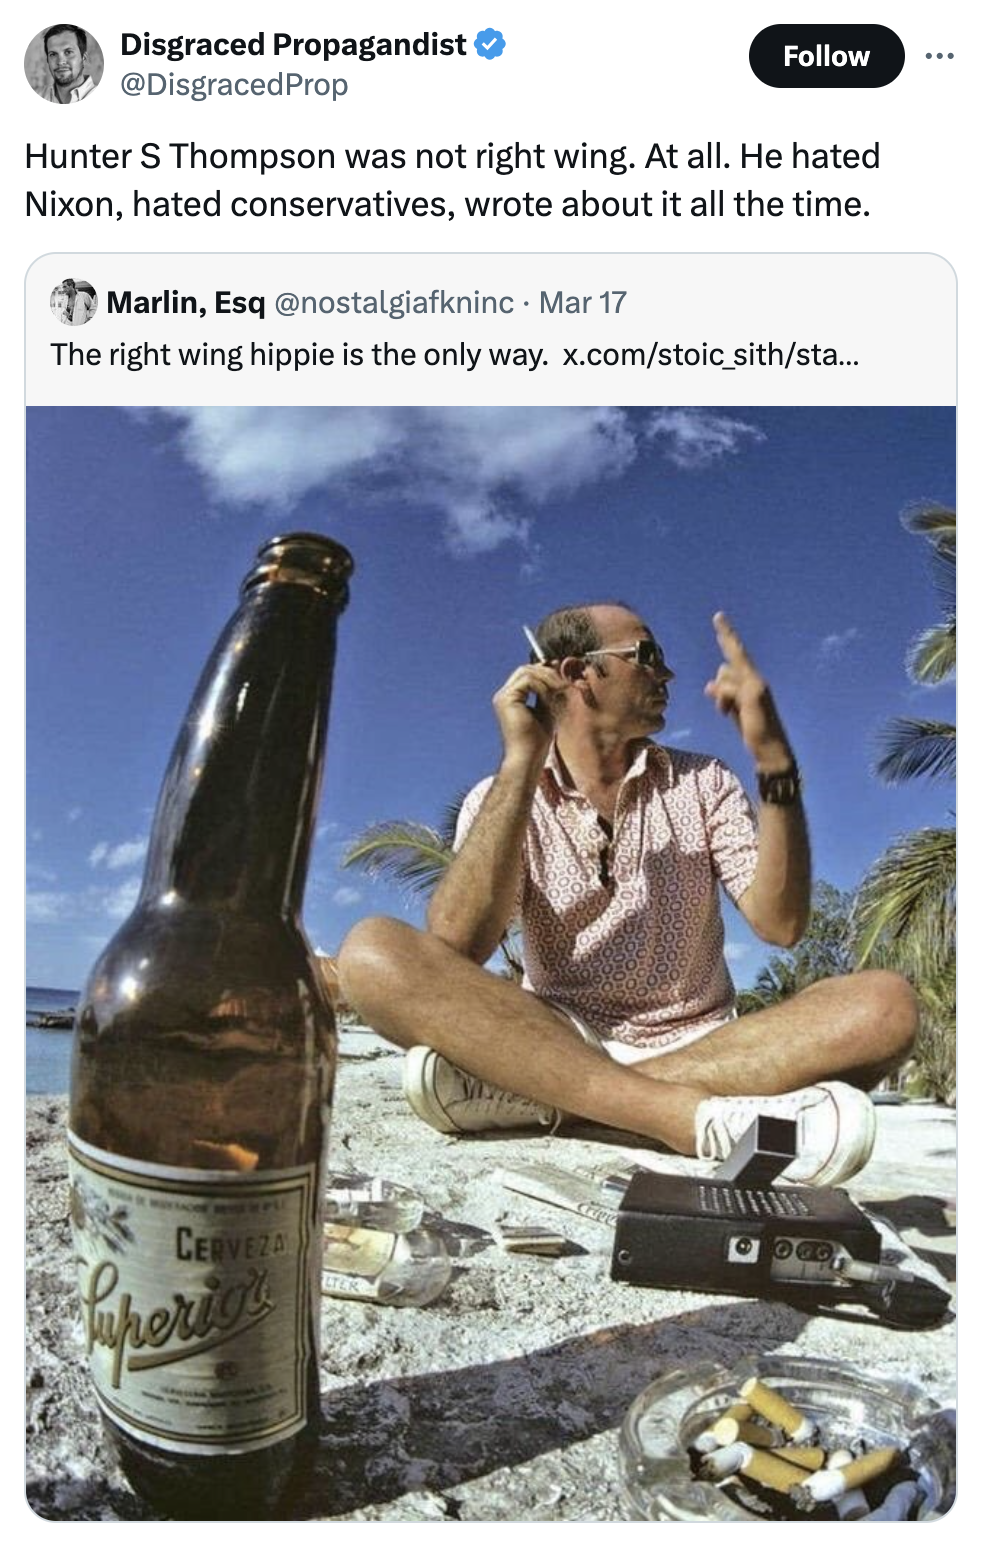 hunter s thompson cozumel - Disgraced Propagandist Hunter S Thompson was not right wing. At all. He hated Nixon, hated conservatives, wrote about it all the time. Marlin, Esq Mar 17 The right wing hippie is the only way. x.comstoic_sithsta... Cenne perio